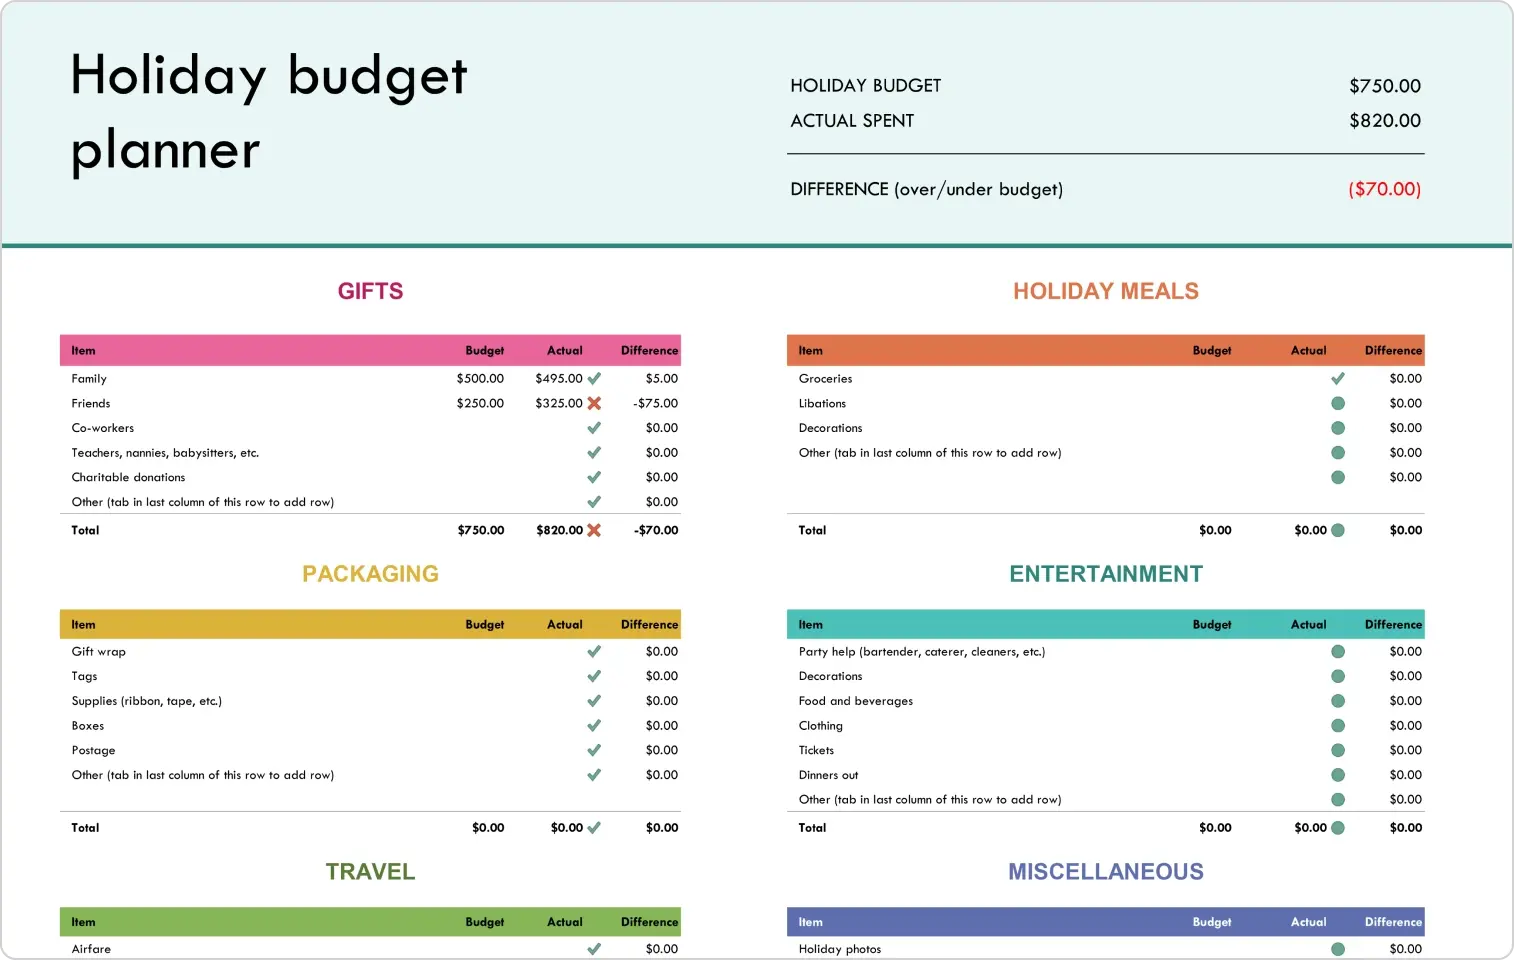 A screenshot of the Excel holiday budget planner template